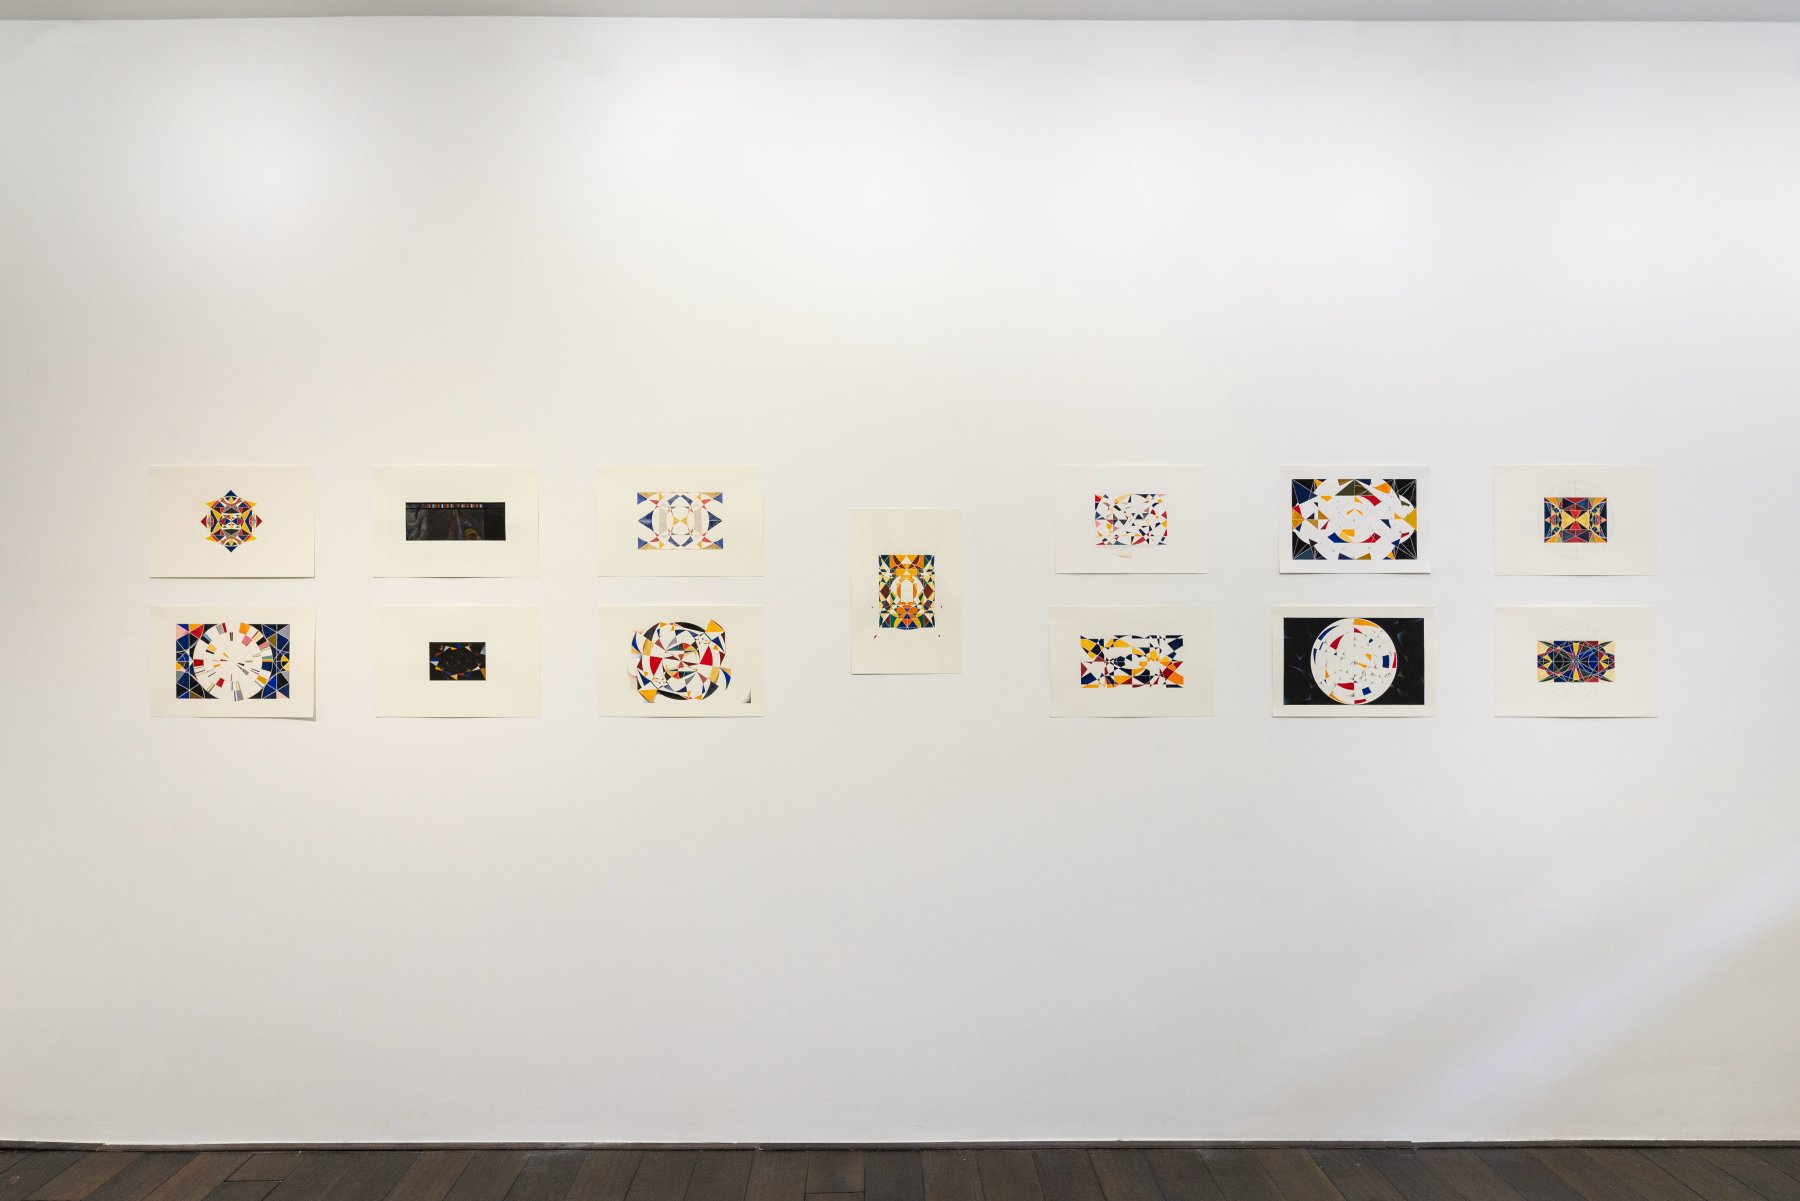 Installation image for Sarah Chilvers, at Bartha Contemporary